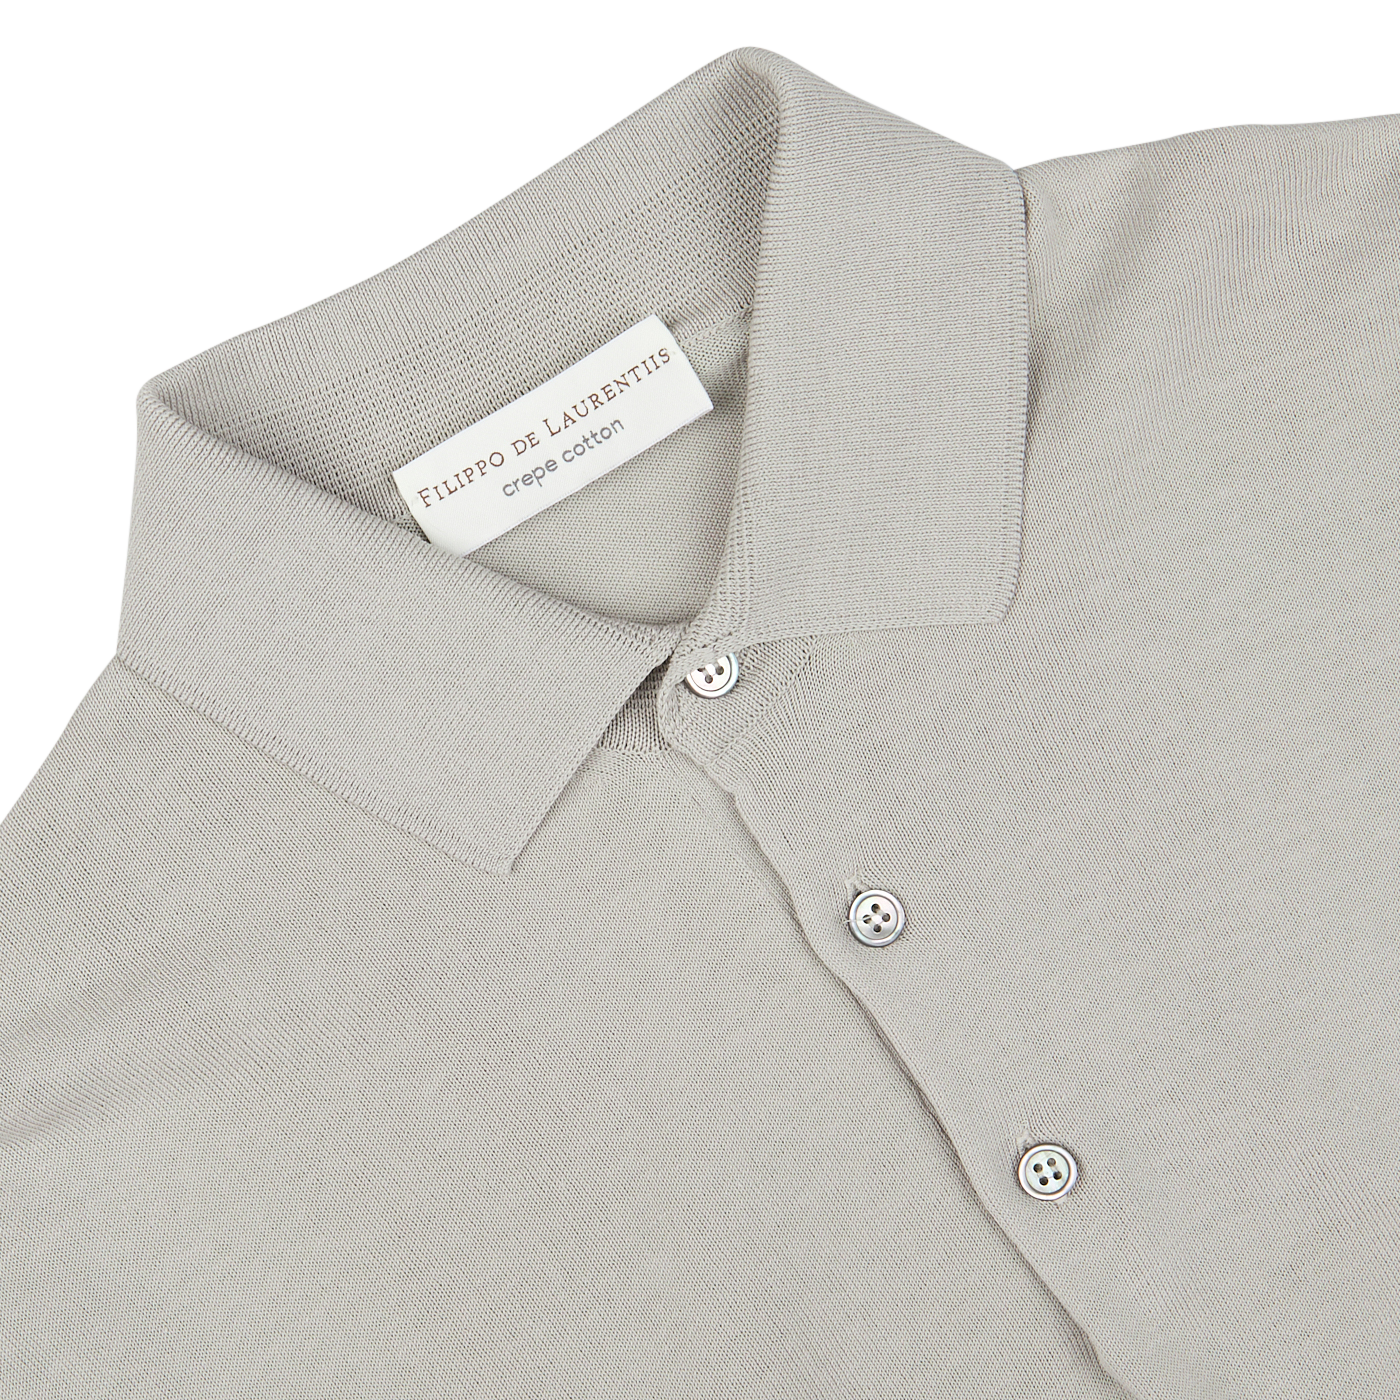 Nebbia Grey Crepe Cotton polo shirt from Filippo de Laurentiis with visible brand label on collar and button-up detail.